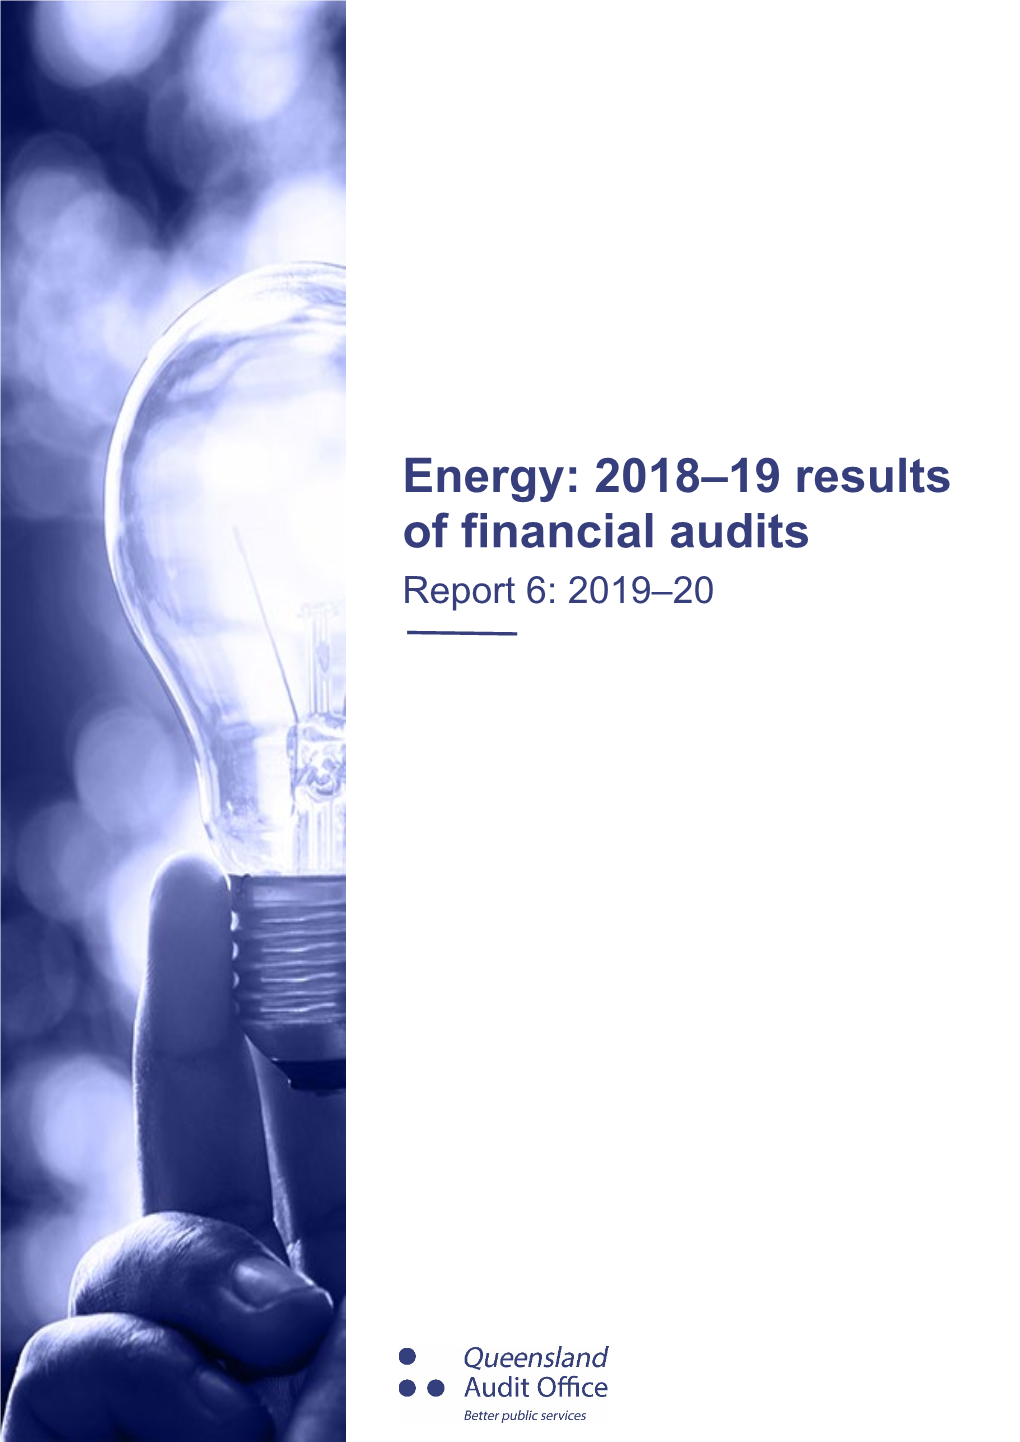 Energy: 2018–19 Results of Financial Audits (Report 6: 2019–20)